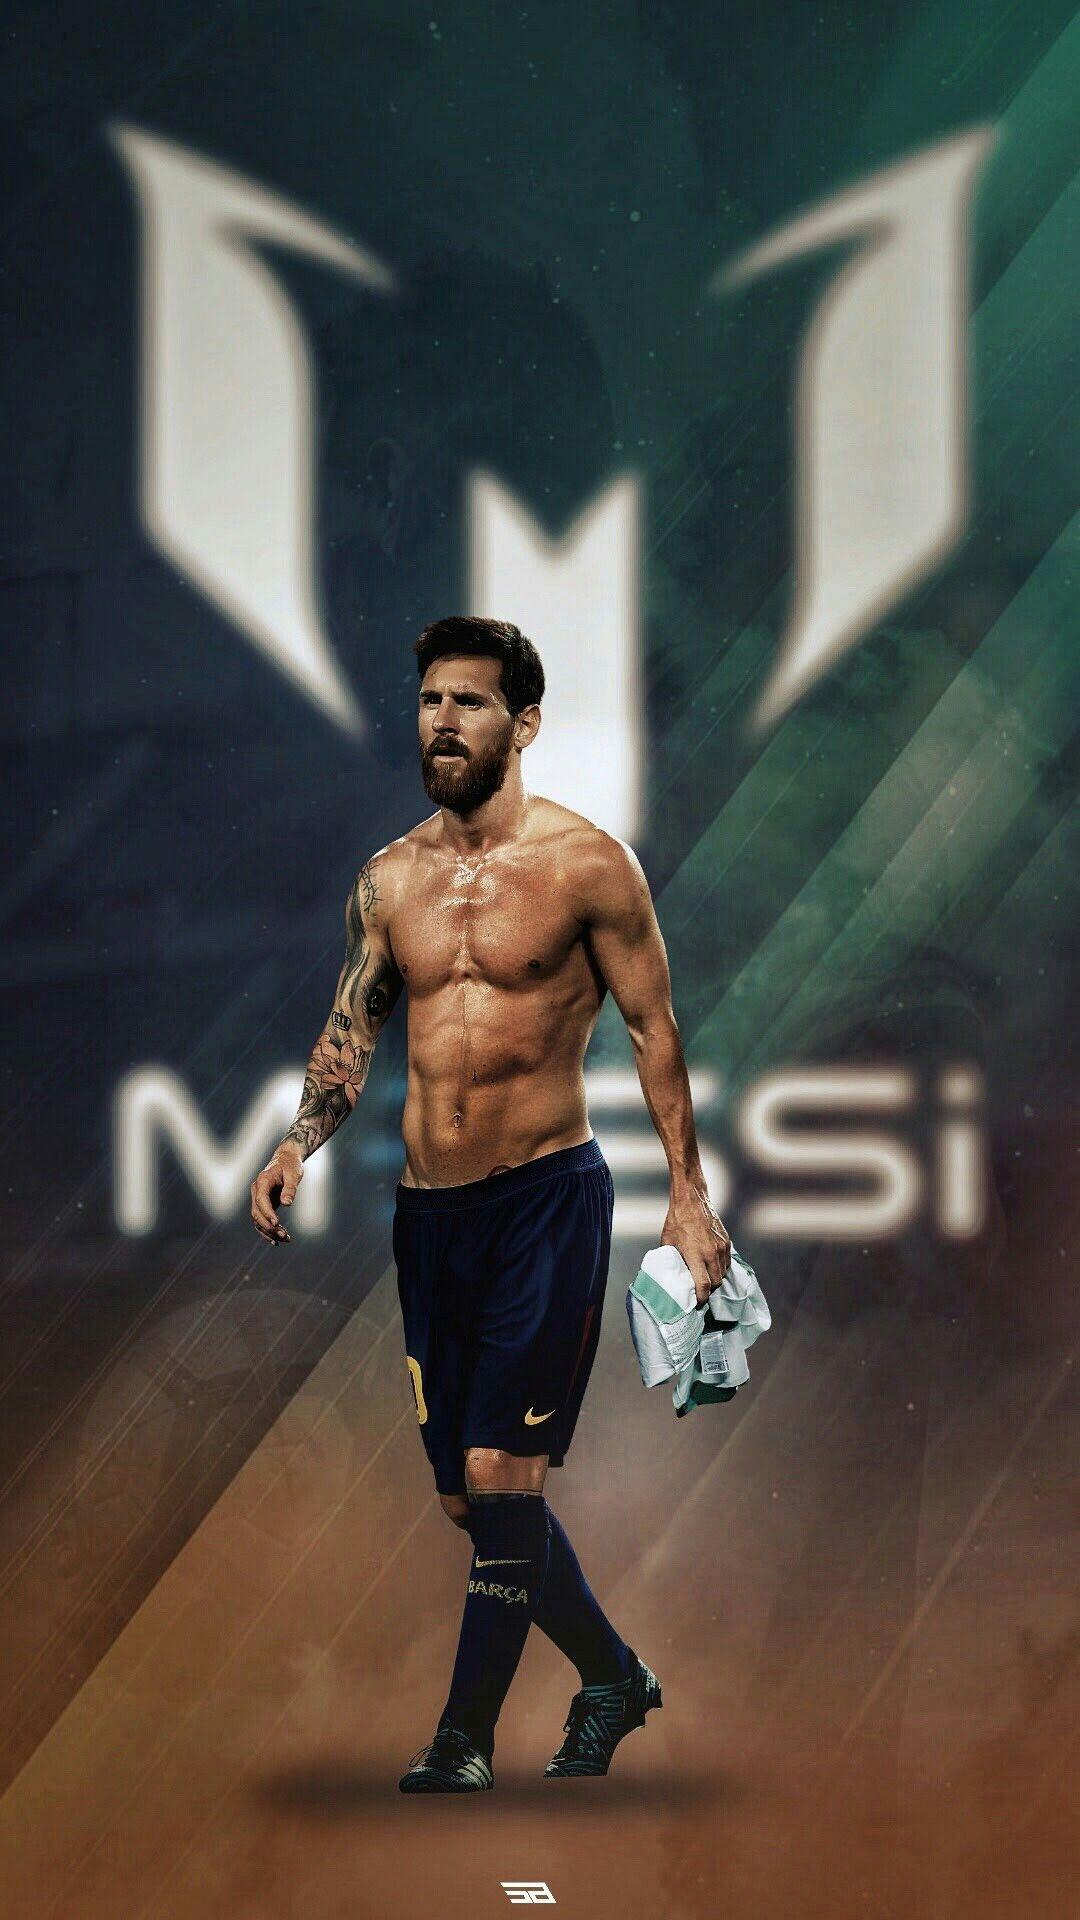 The one nd only messi aka god of football⭕. Lionel